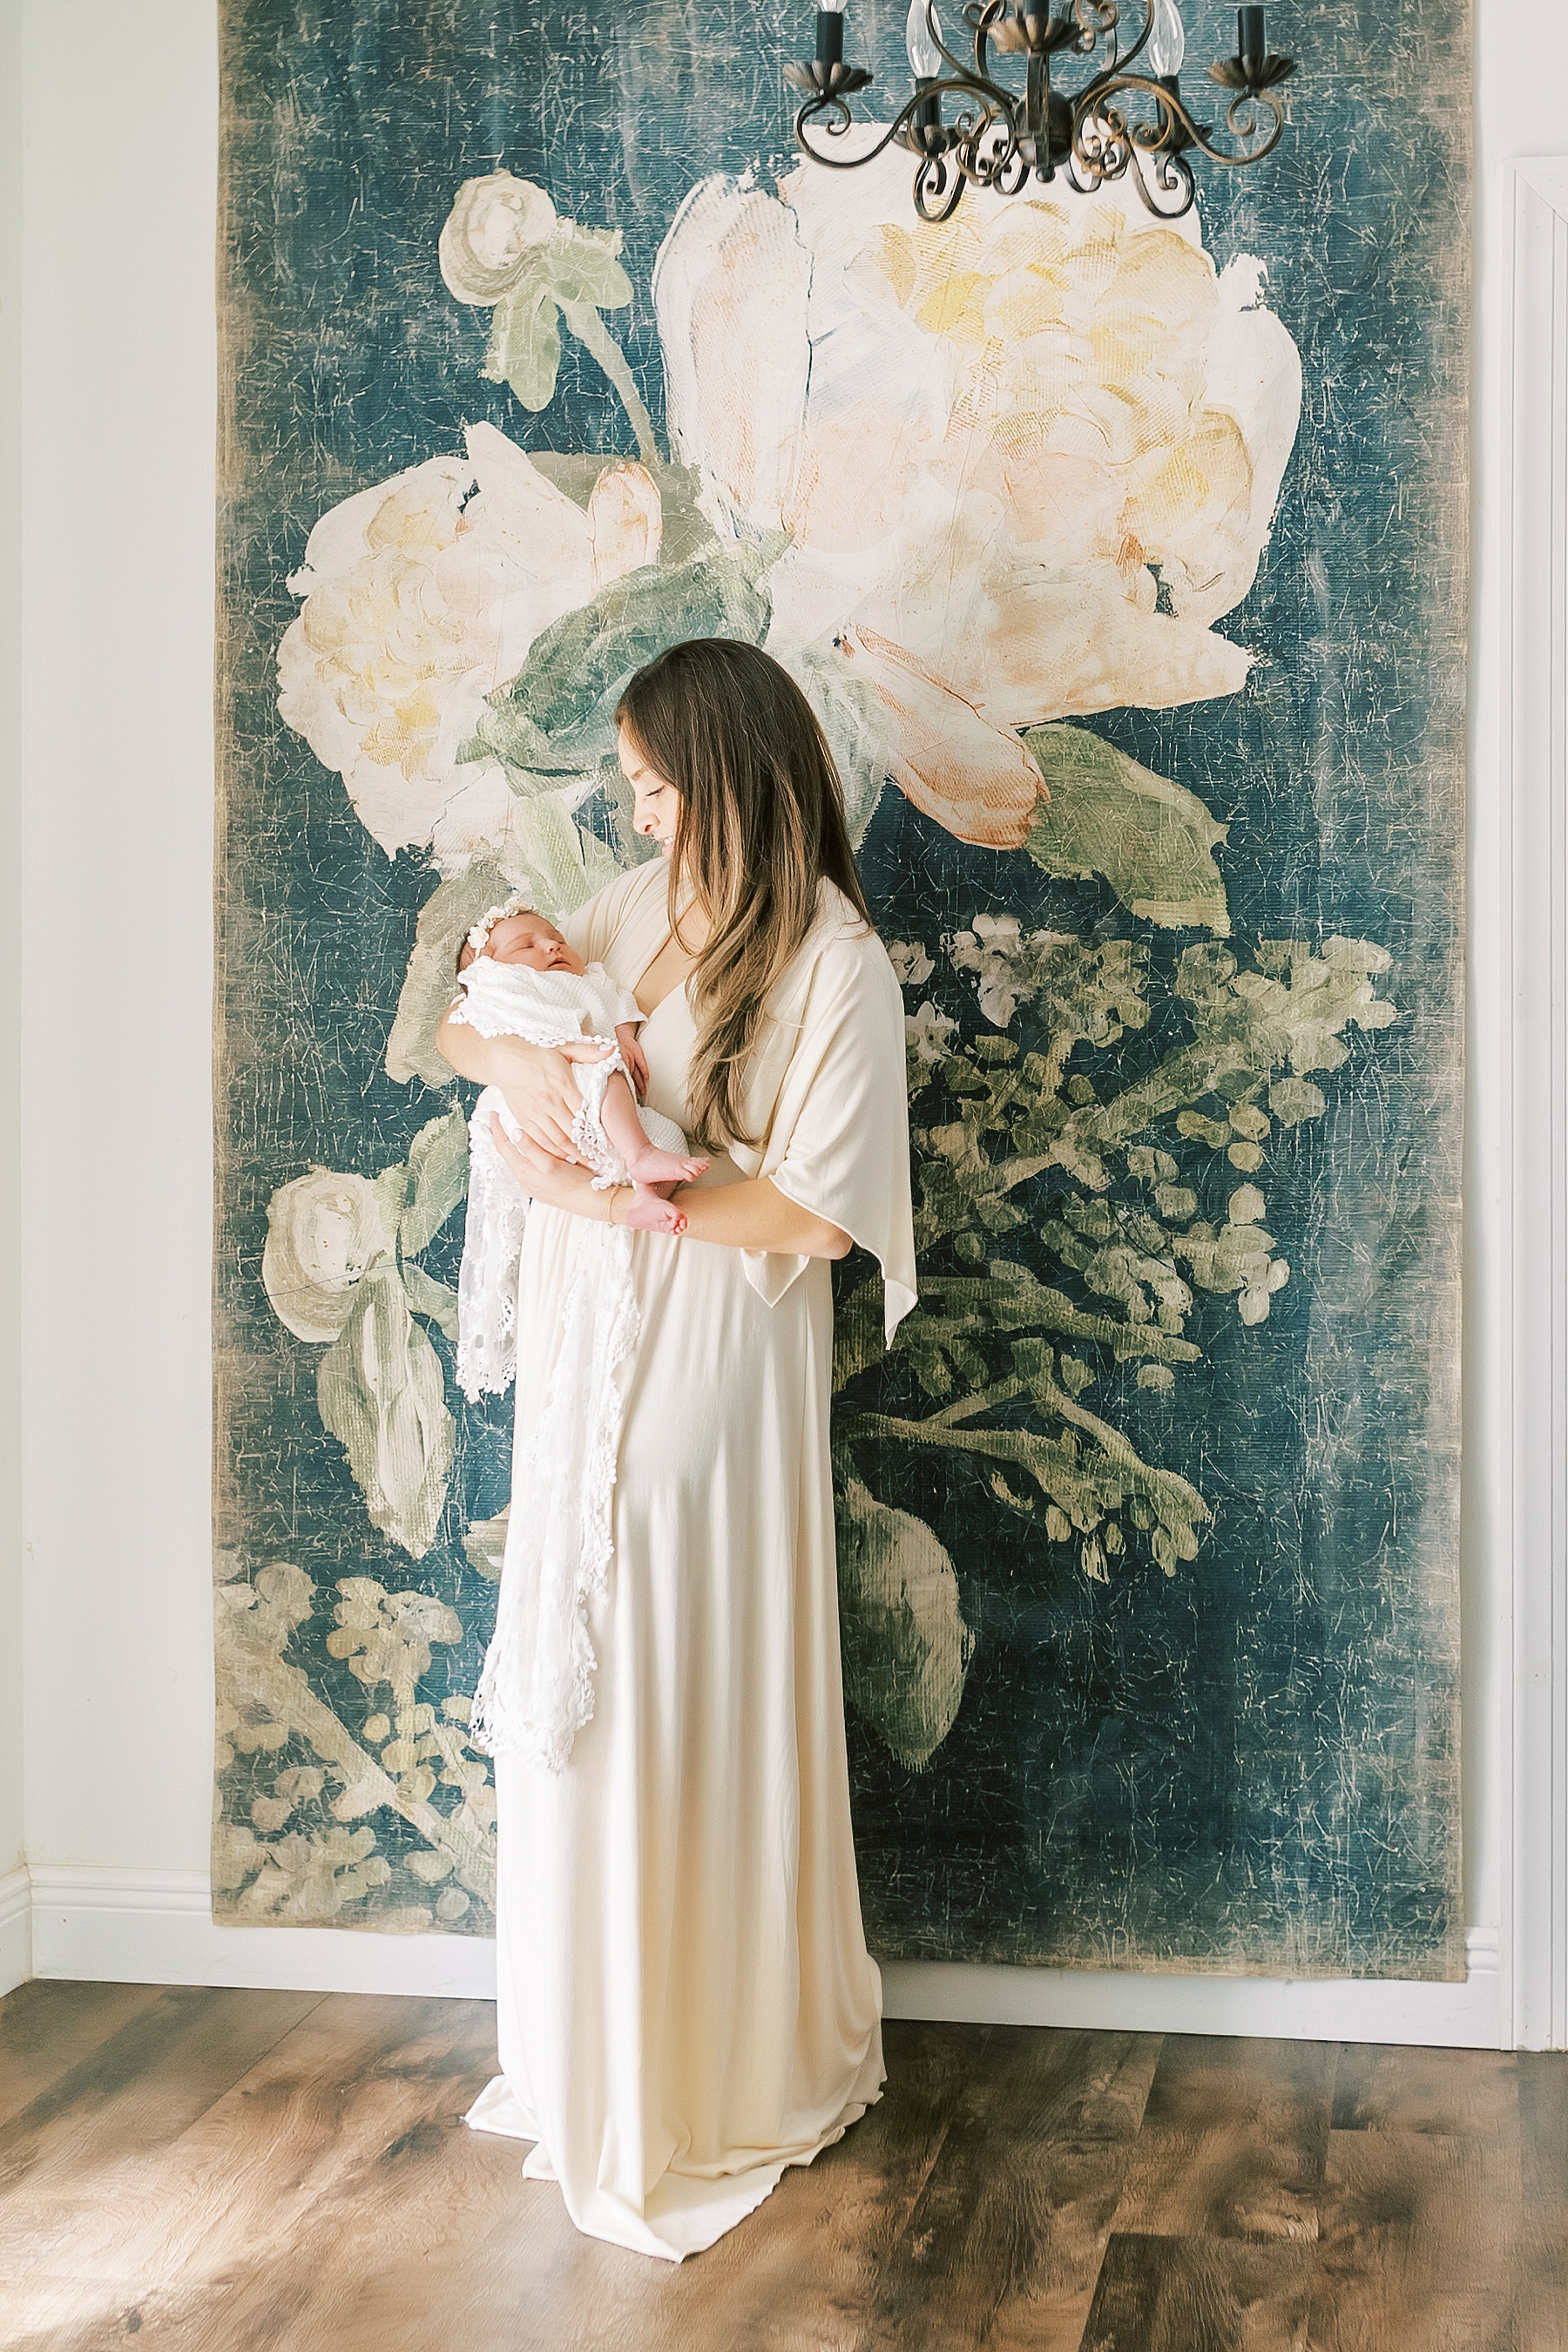 woman in cream dress with long dark hair in front of floral tapestry holding newborn baby girl wrapped in white lace wrap